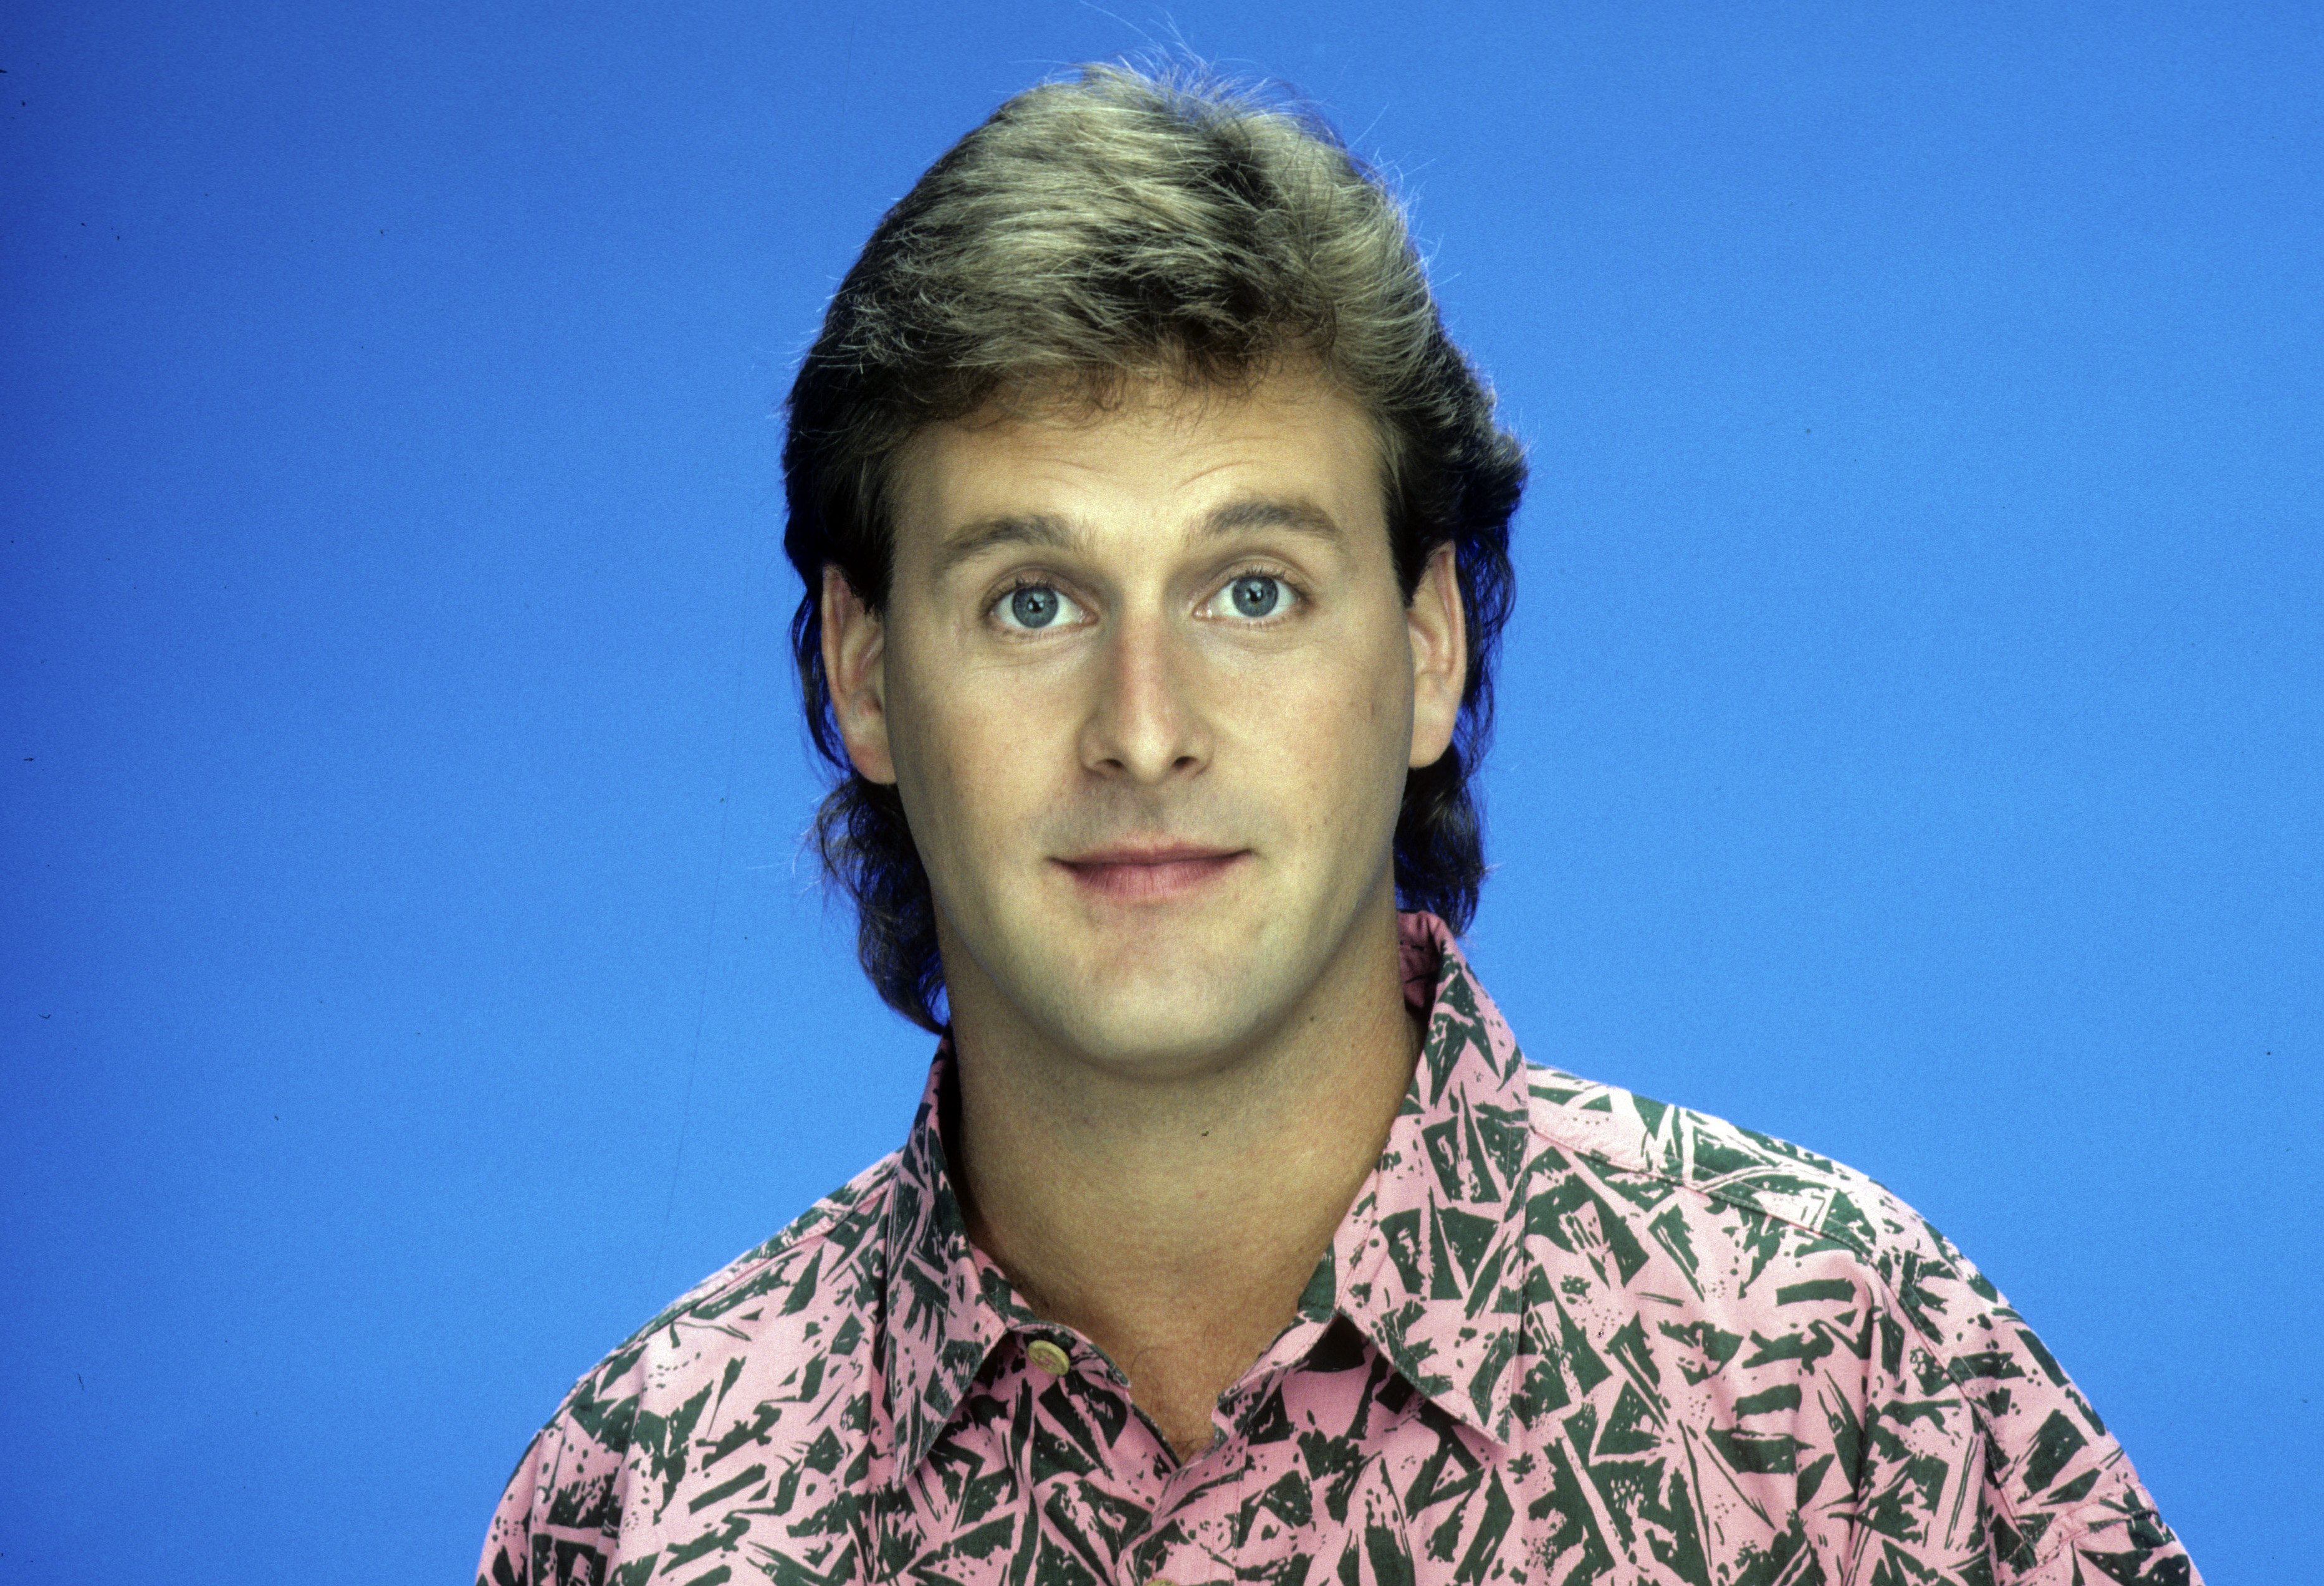 Dave Coulier as Joey Gladstone in "Full House" on June 26, 1987 | Source: Getty Images